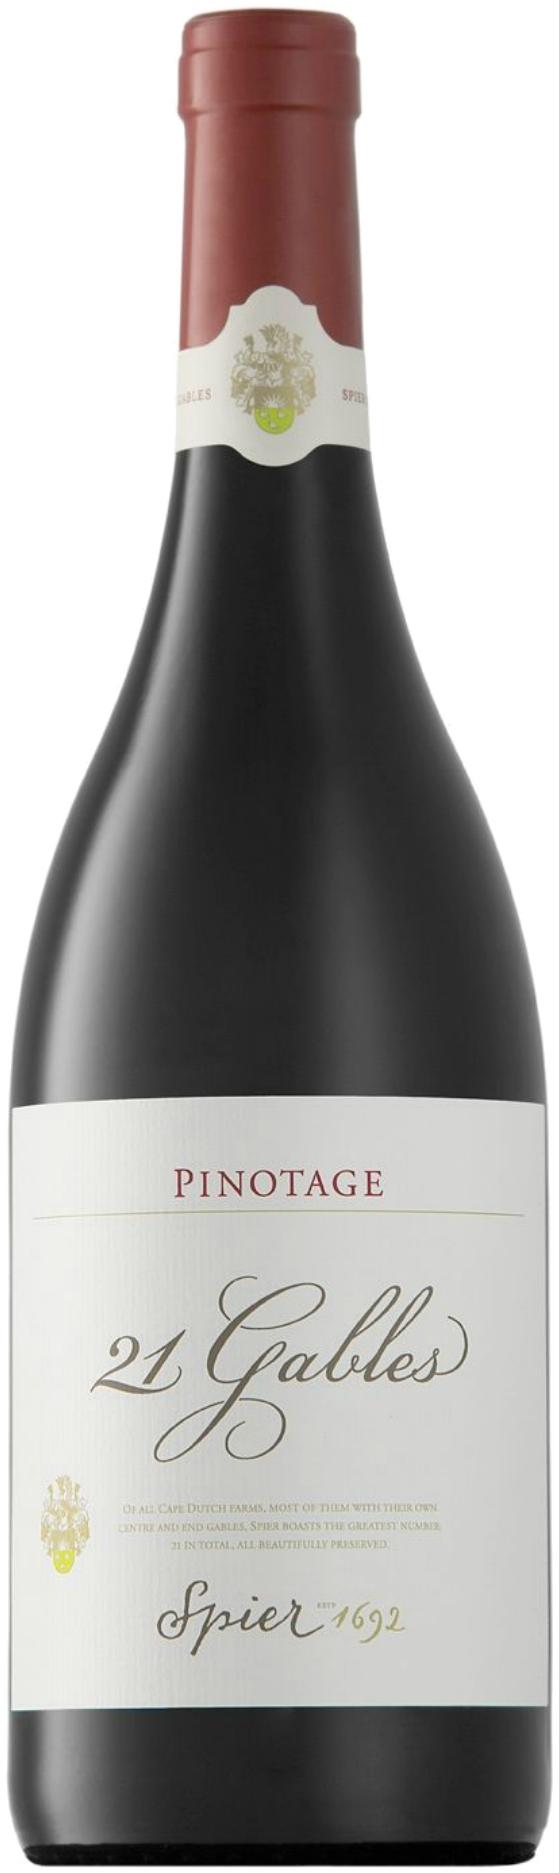 Spier 21 Gables Pinotage 2018